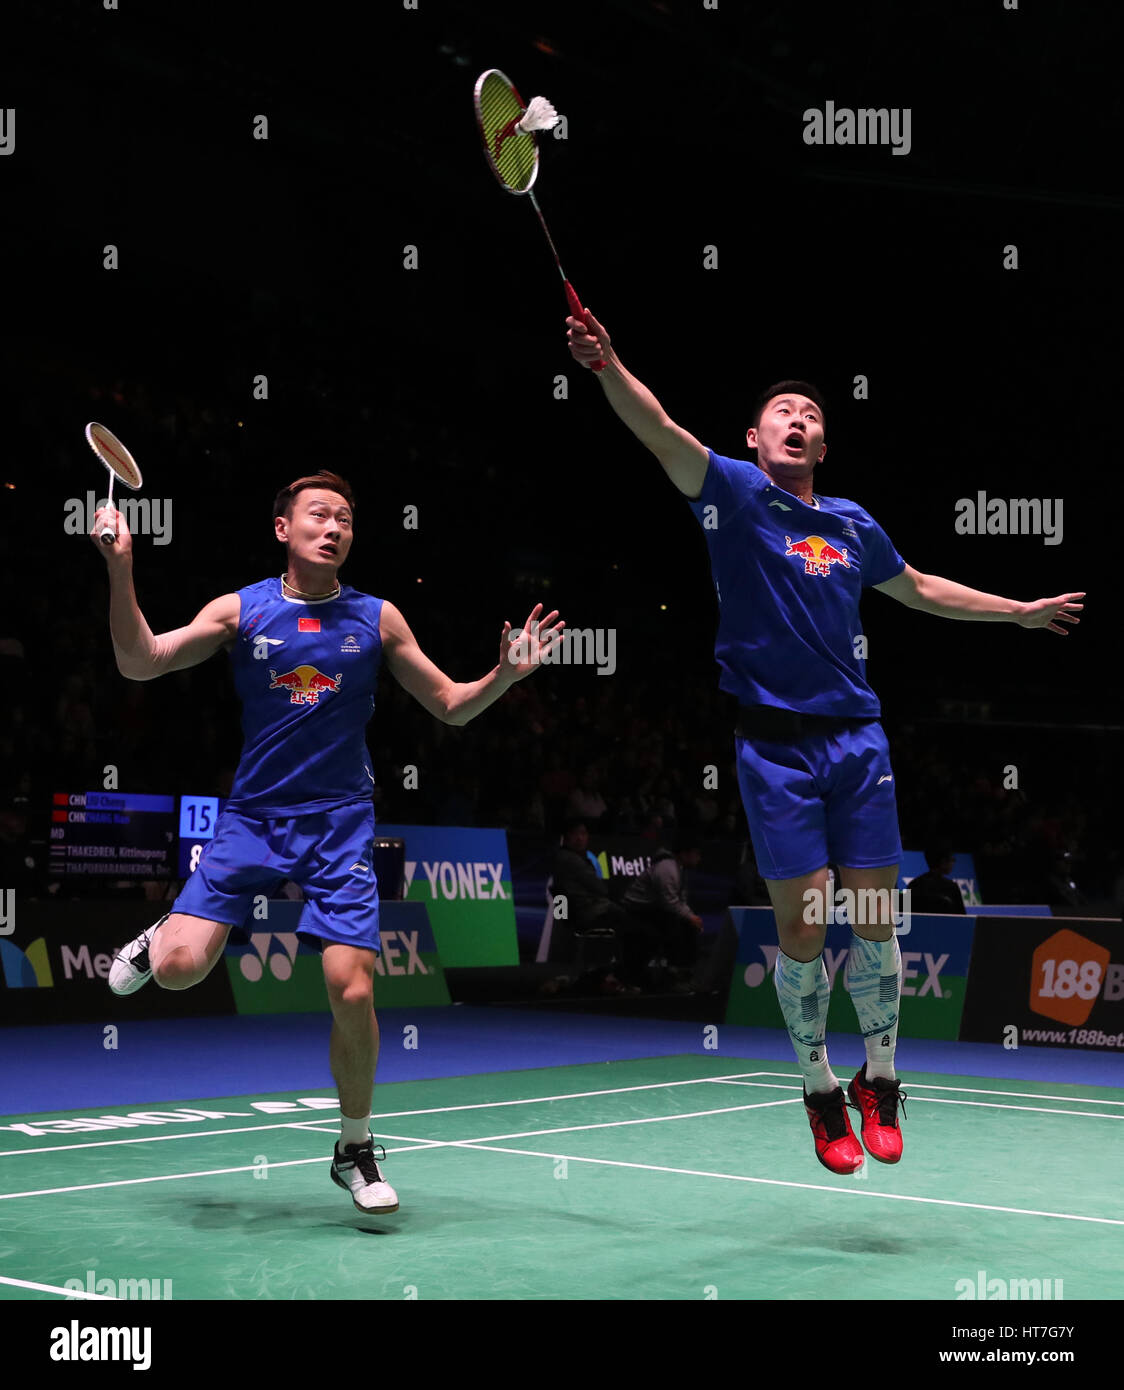 China's Liu Cheng (right) and Zhang Nan in action during the Men's doubles match during day two of the YONEX All England Open Badminton Championships at the Barclaycard Arena, Birmingham. Stock Photo